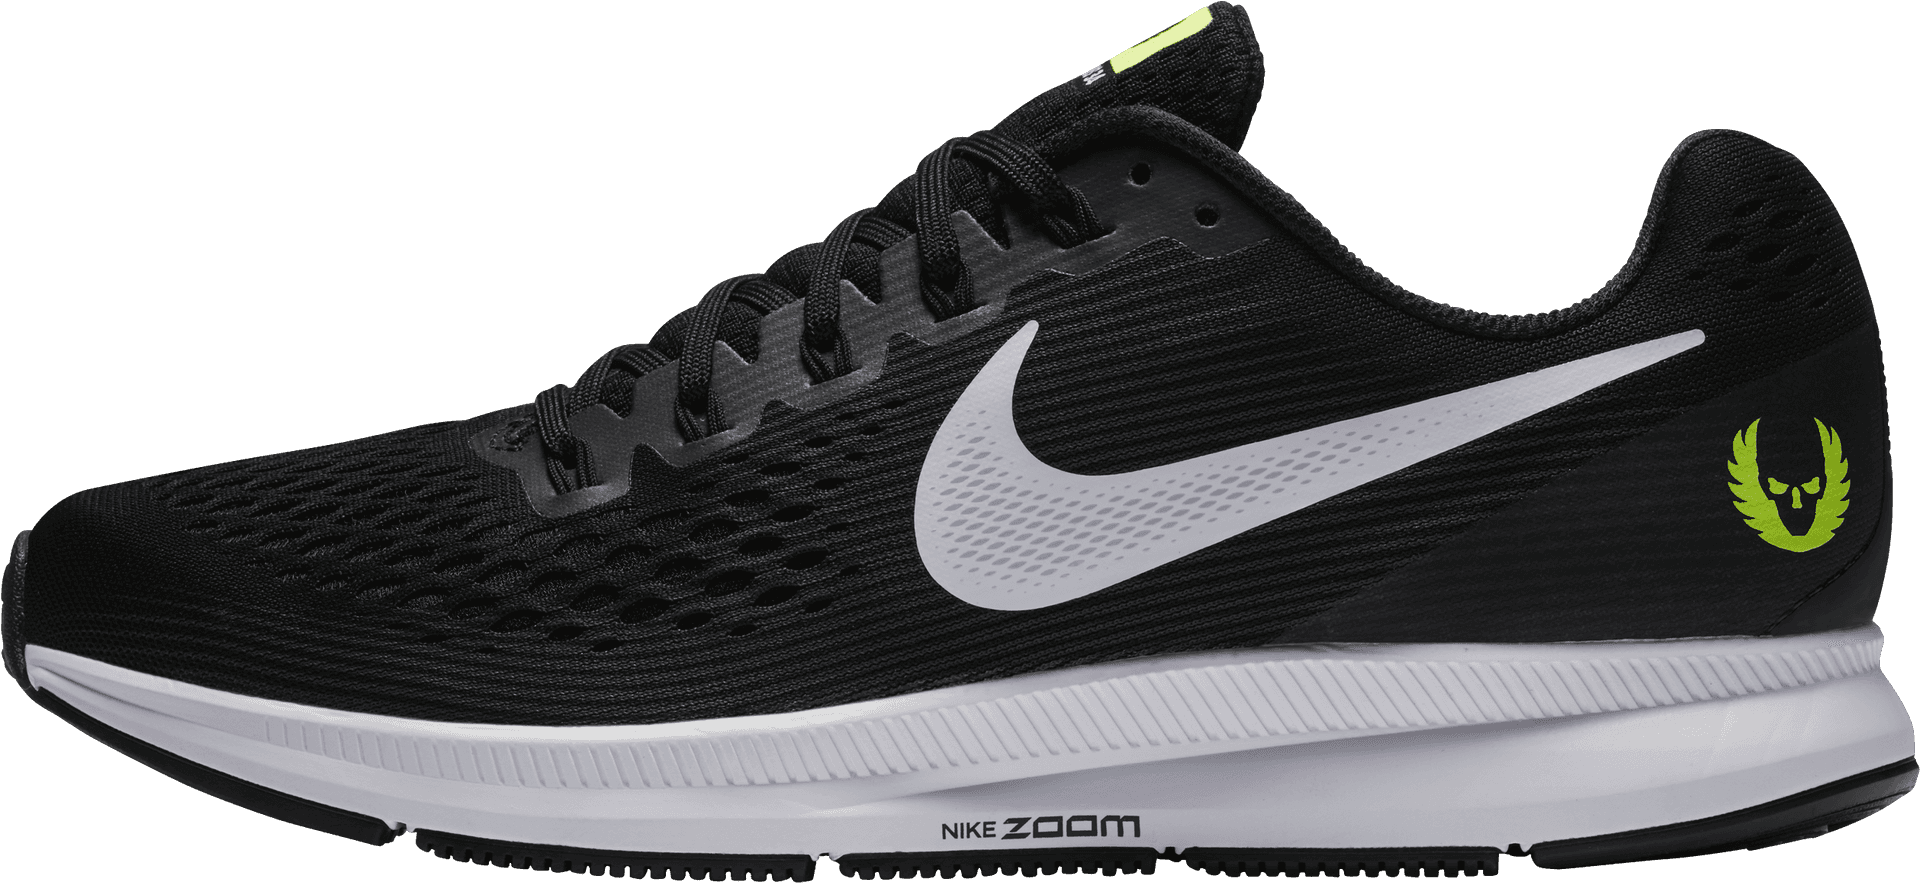 Nike Zoom Running Shoe Side View PNG